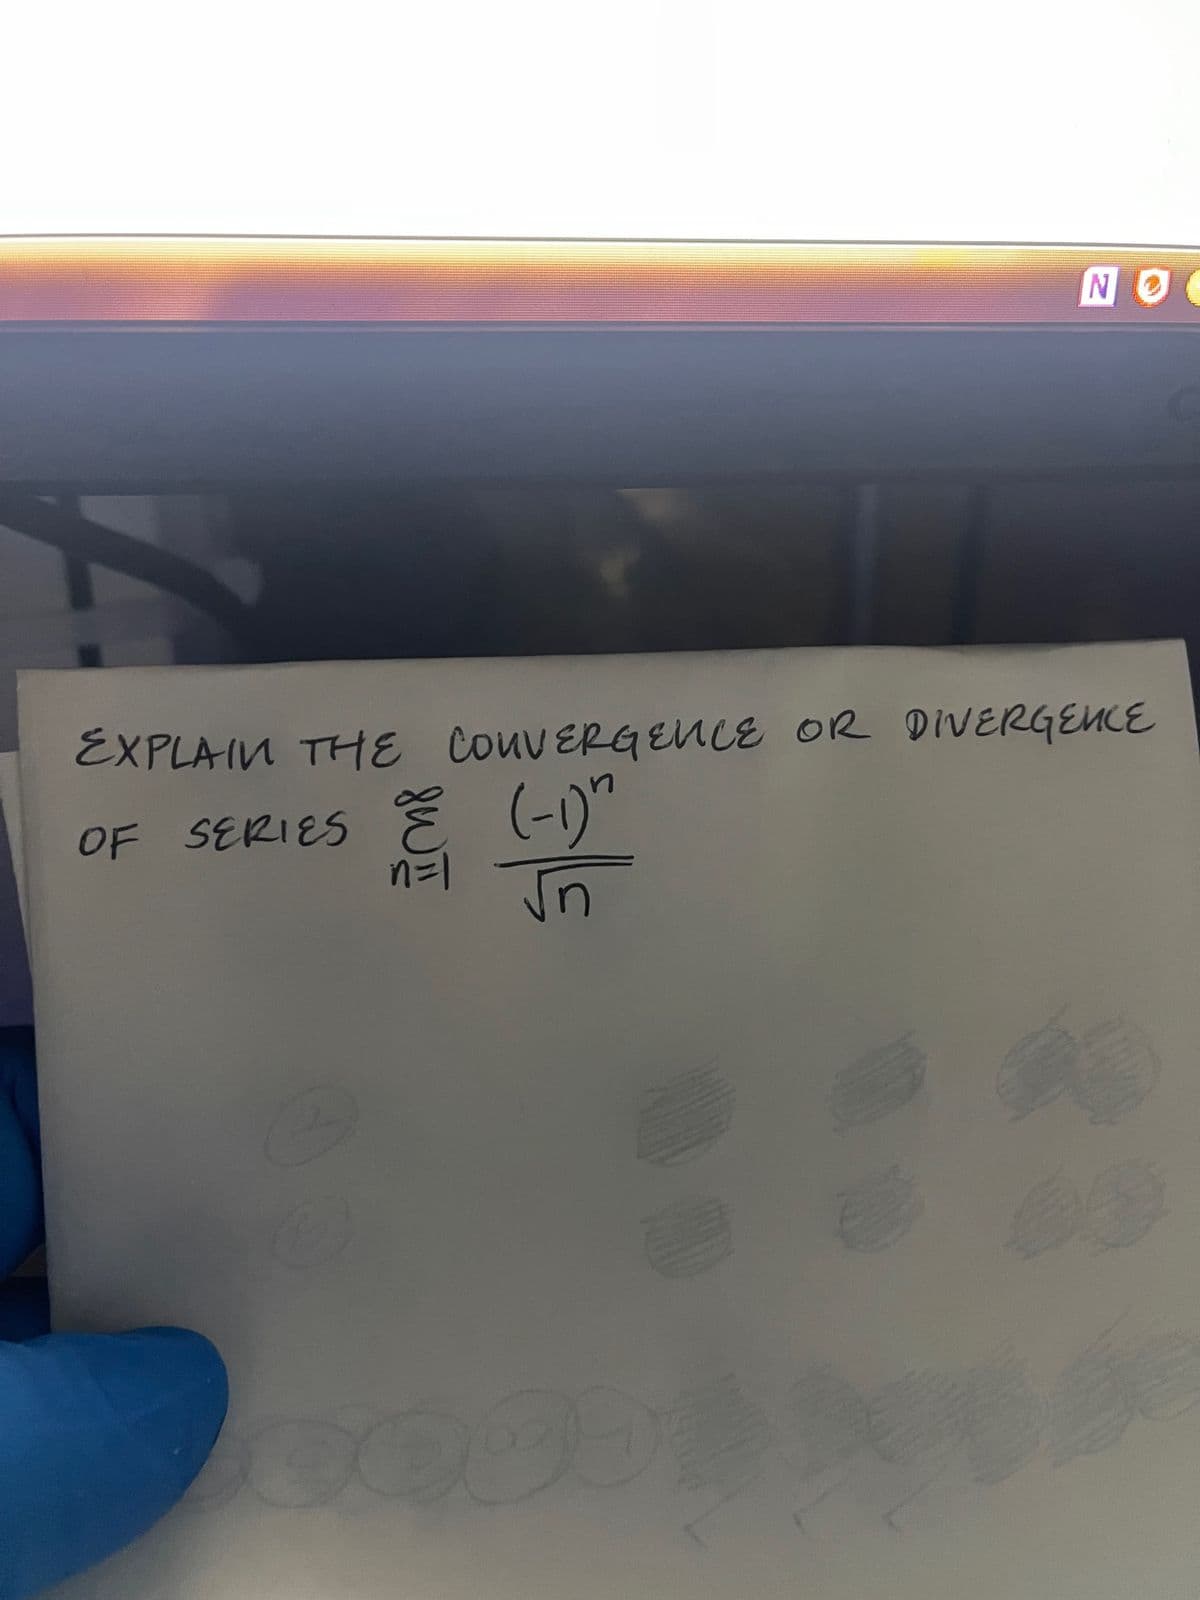 NO
EXPLAIN THE CONVERGENCE OR DIVERGENCE
€
OF SERIES (-1)^